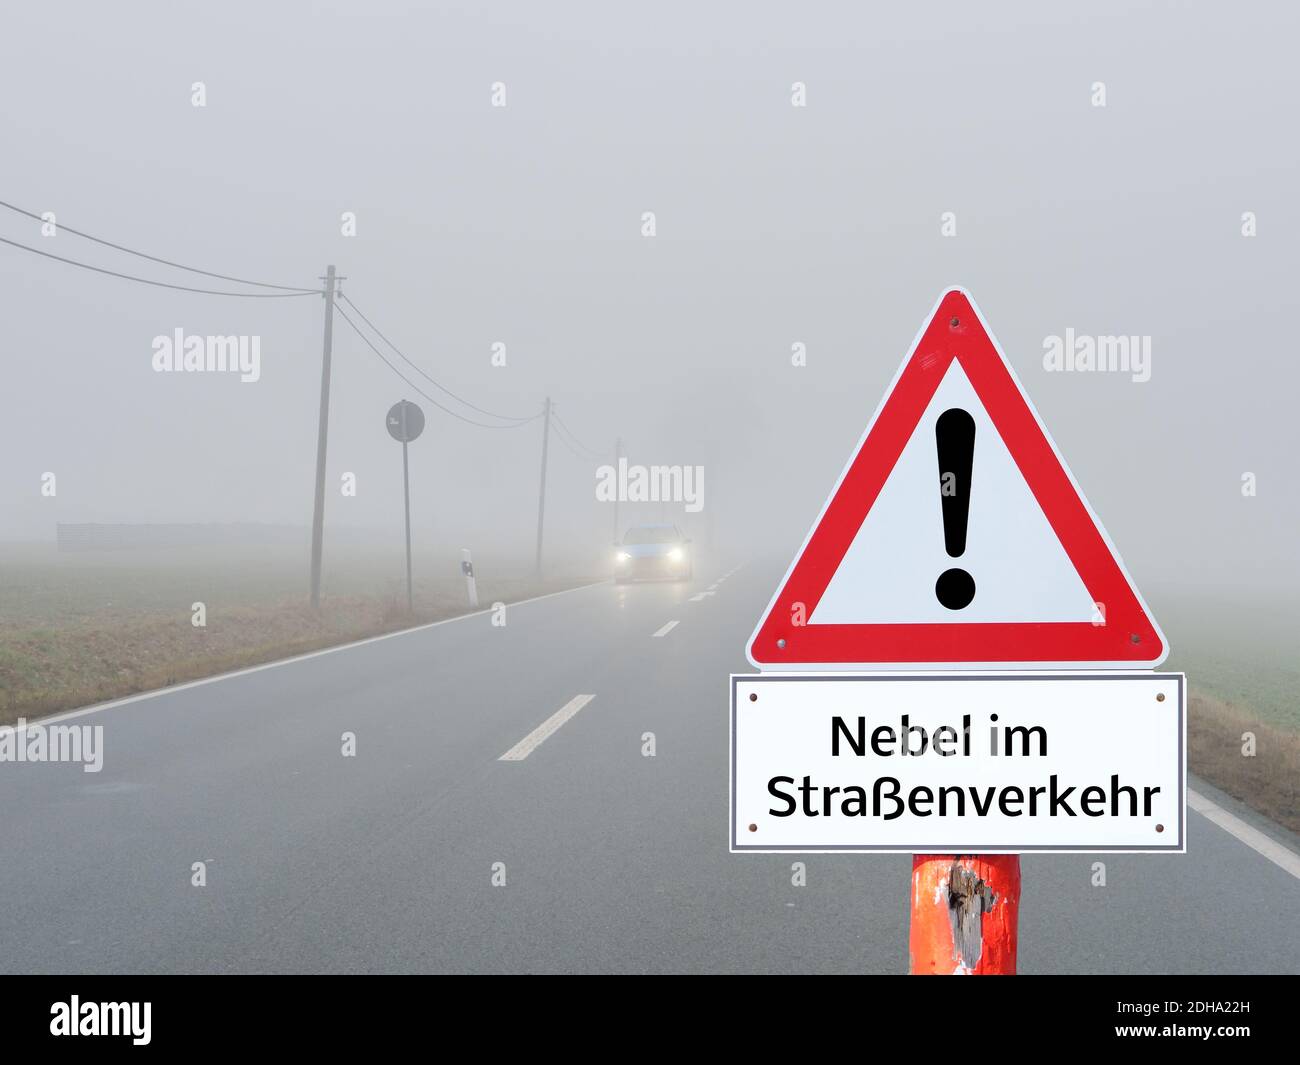 Fog warning sign in road traffic in a curve in german Stock Photo